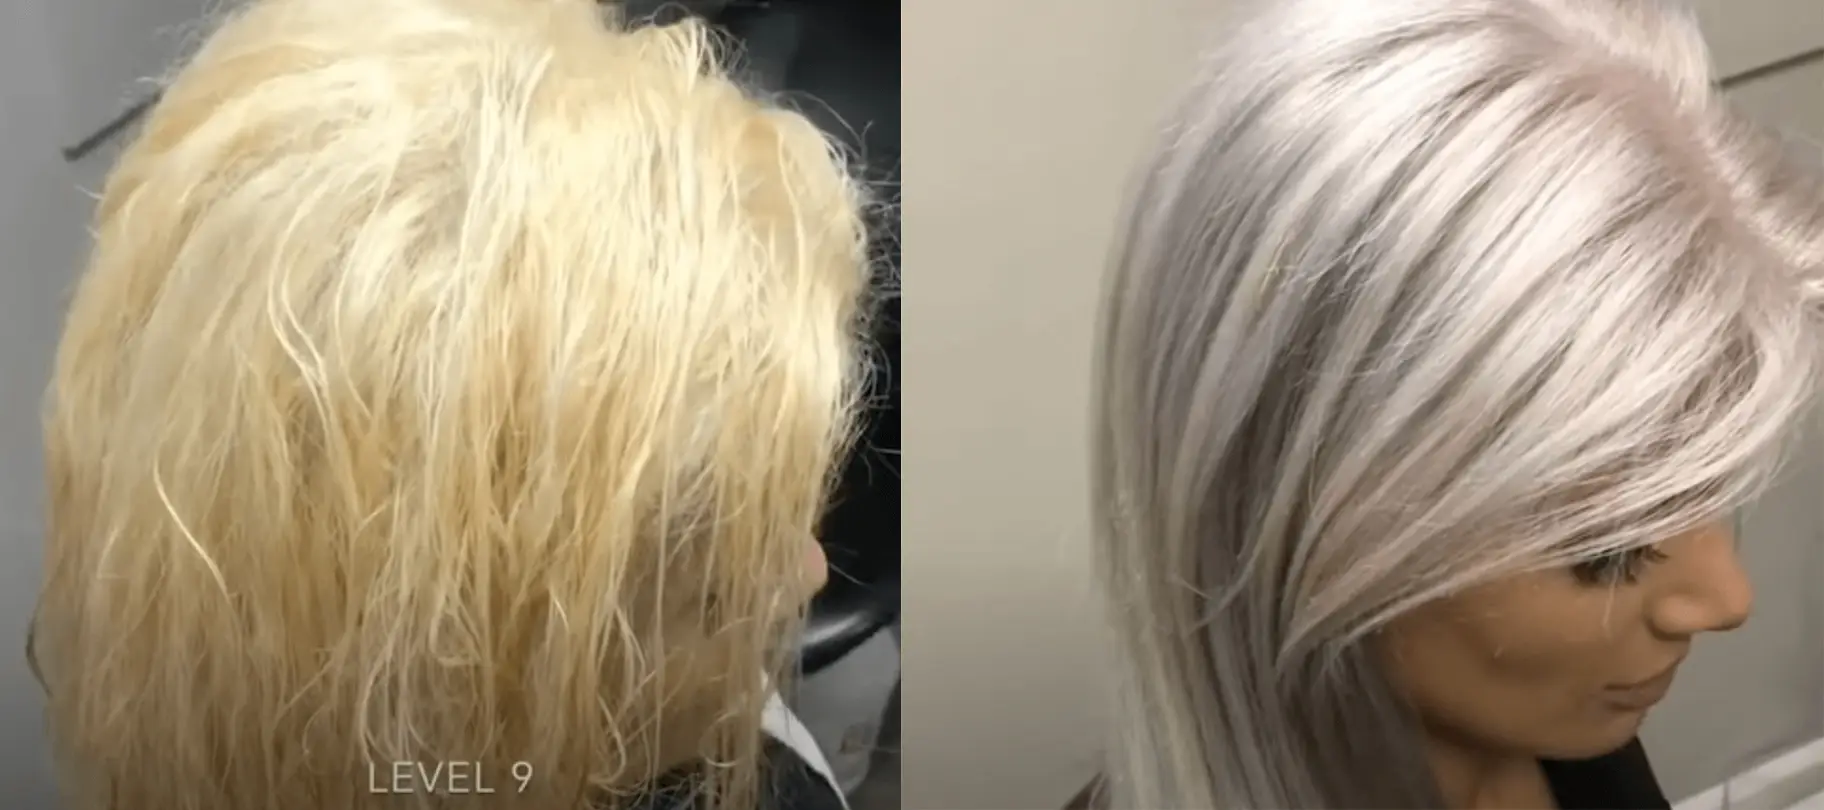 Blonde Hair Toners: Before And After - Ugly Duckling